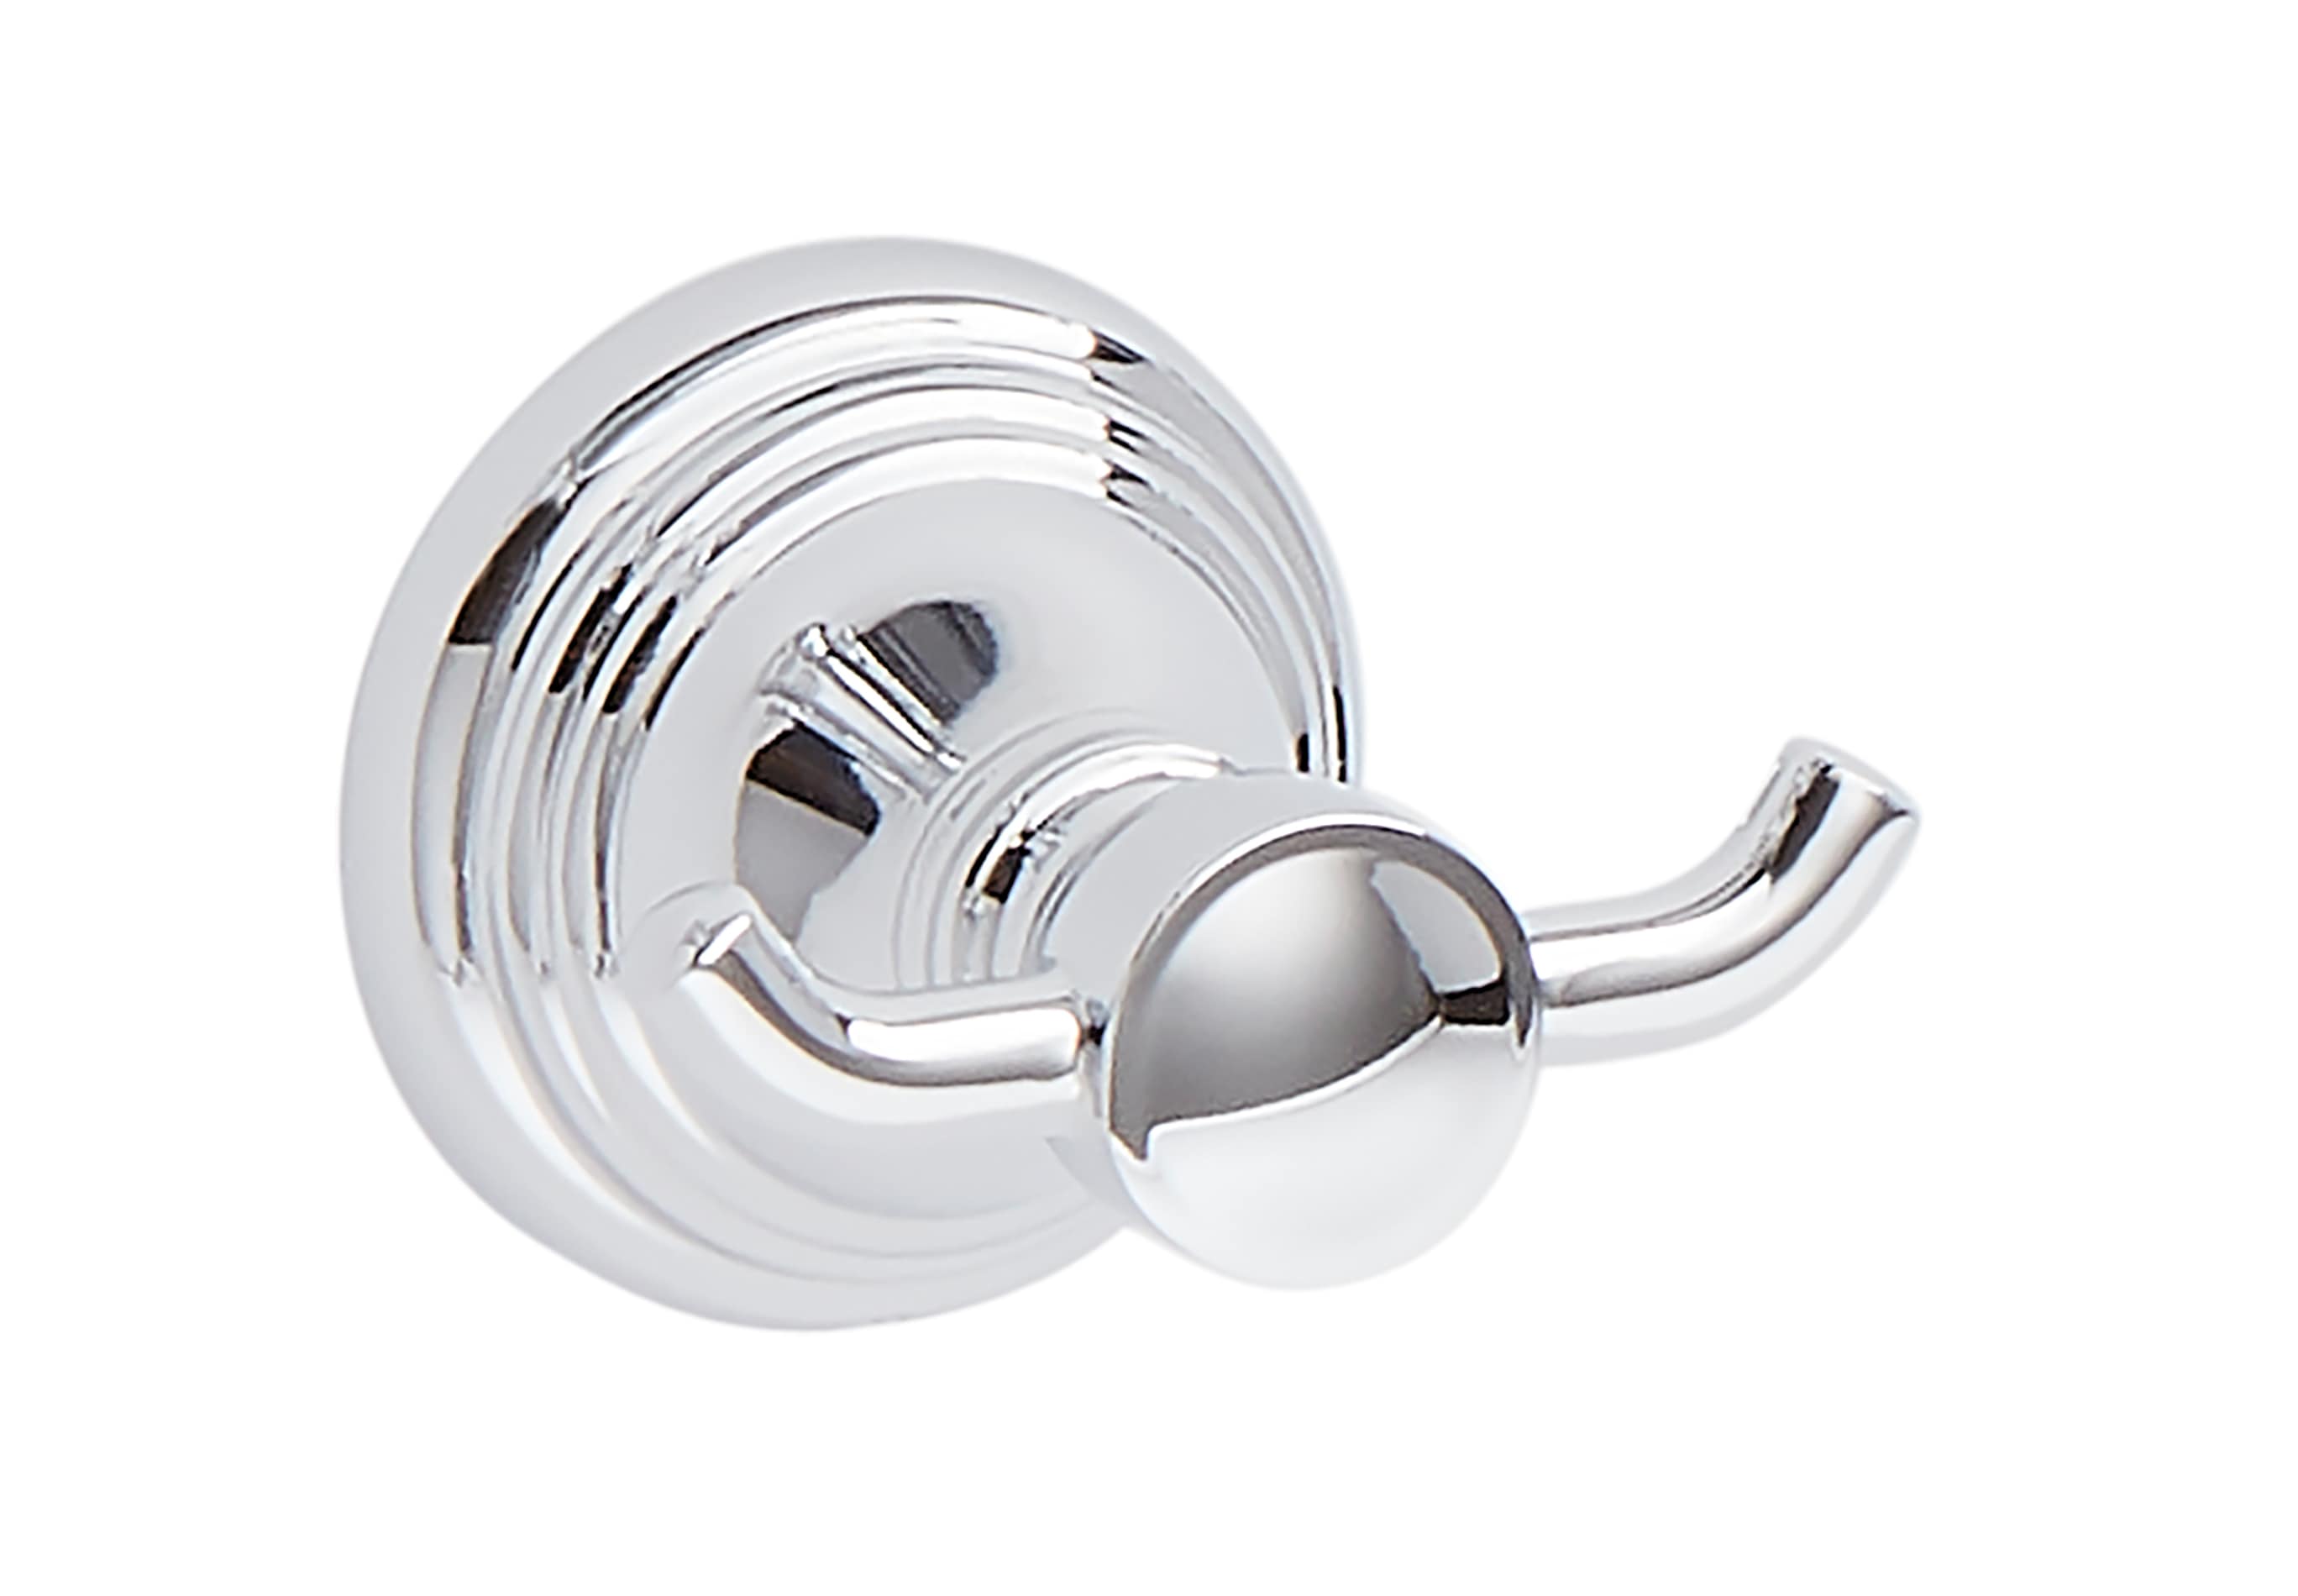 Saylor Double Robe Hook in Chrome